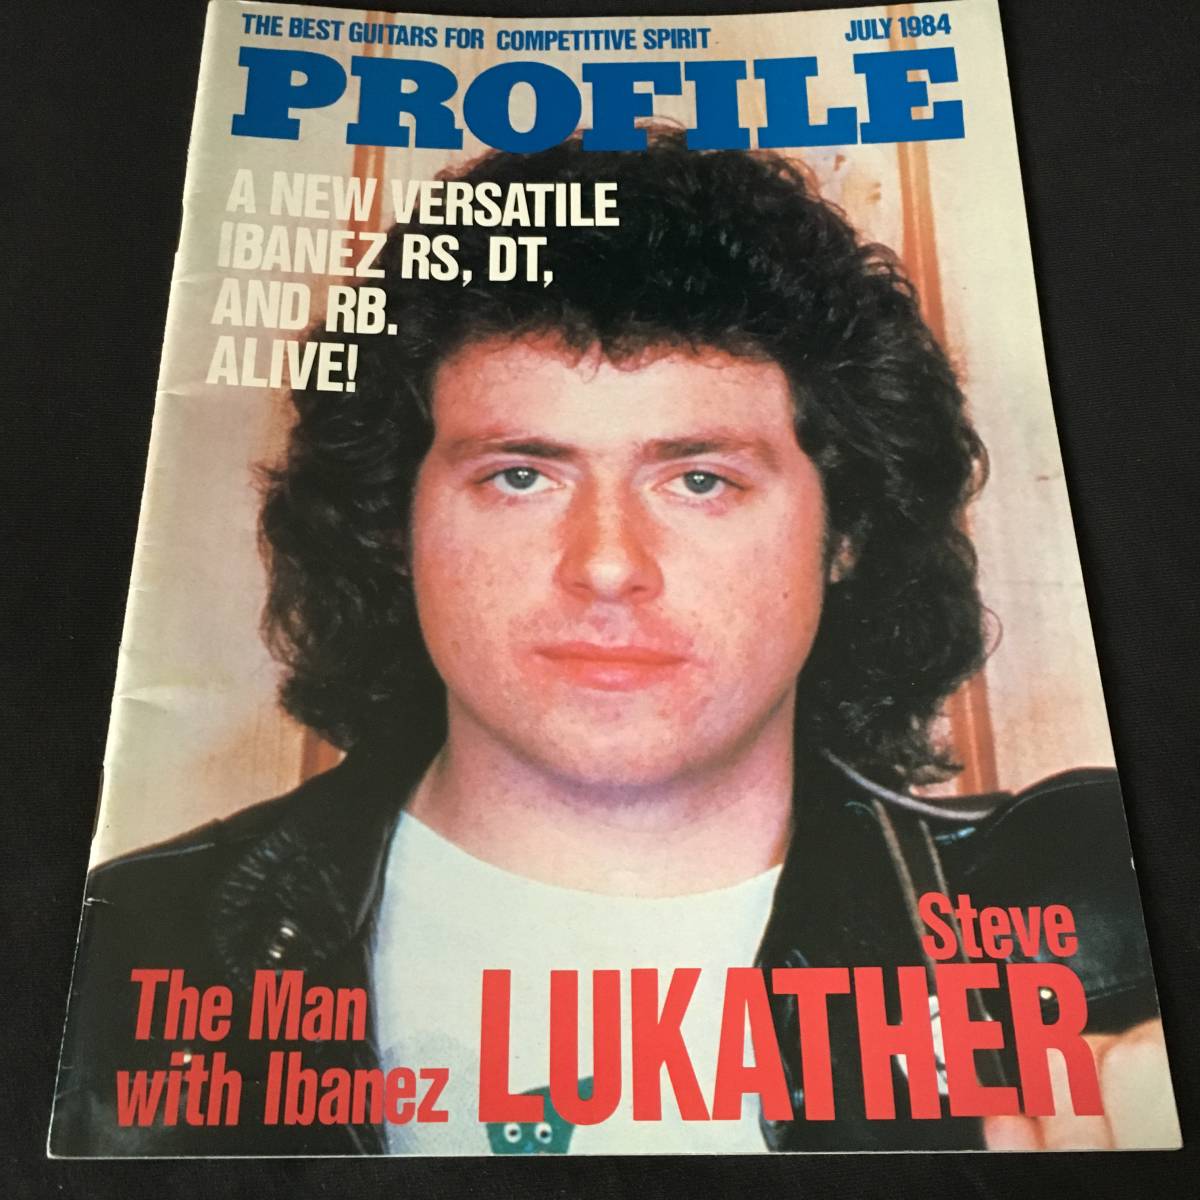 [ free shipping ][ catalog ]Ibanez PROFILE A New Versatile[1984][Steve Lukather][ star . musical instruments ][ Ibanez ]